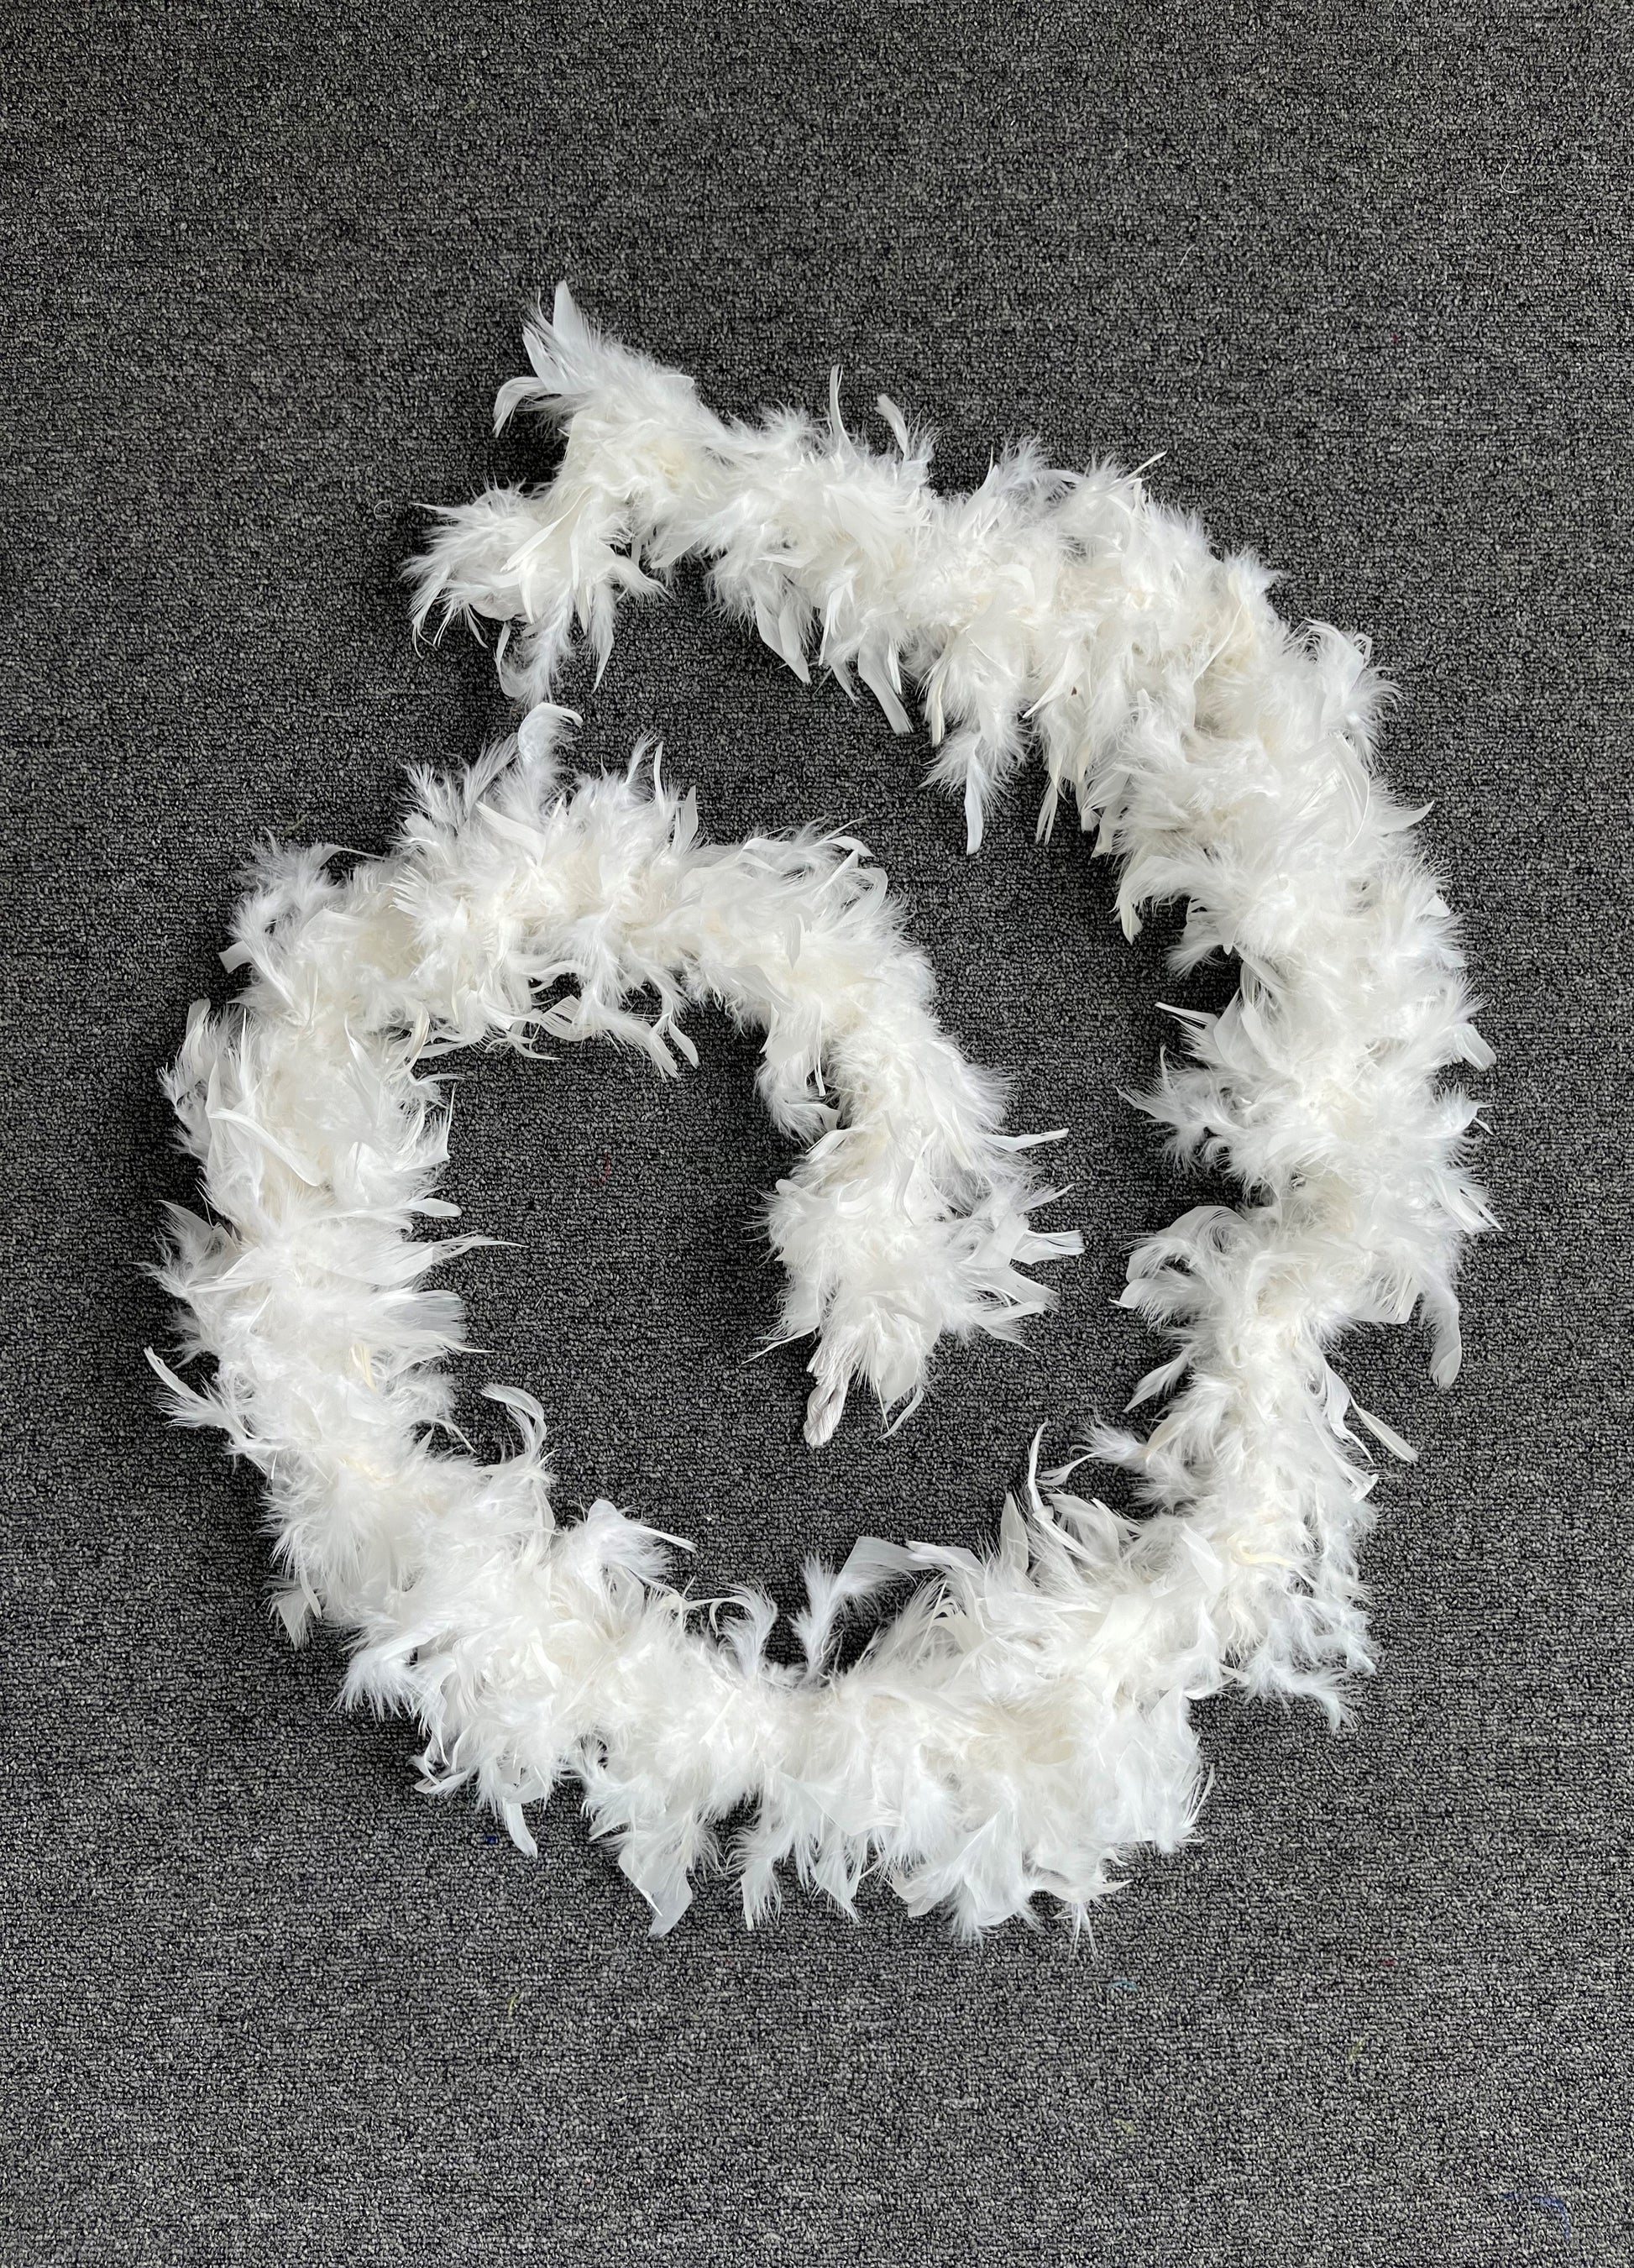 SchumanFeather Chandelle Feather Boa, 40 Gram, Minimal Shedding, High Quality, Feather Boas, for, Costume, Dance, Dress Up, per Each Boa